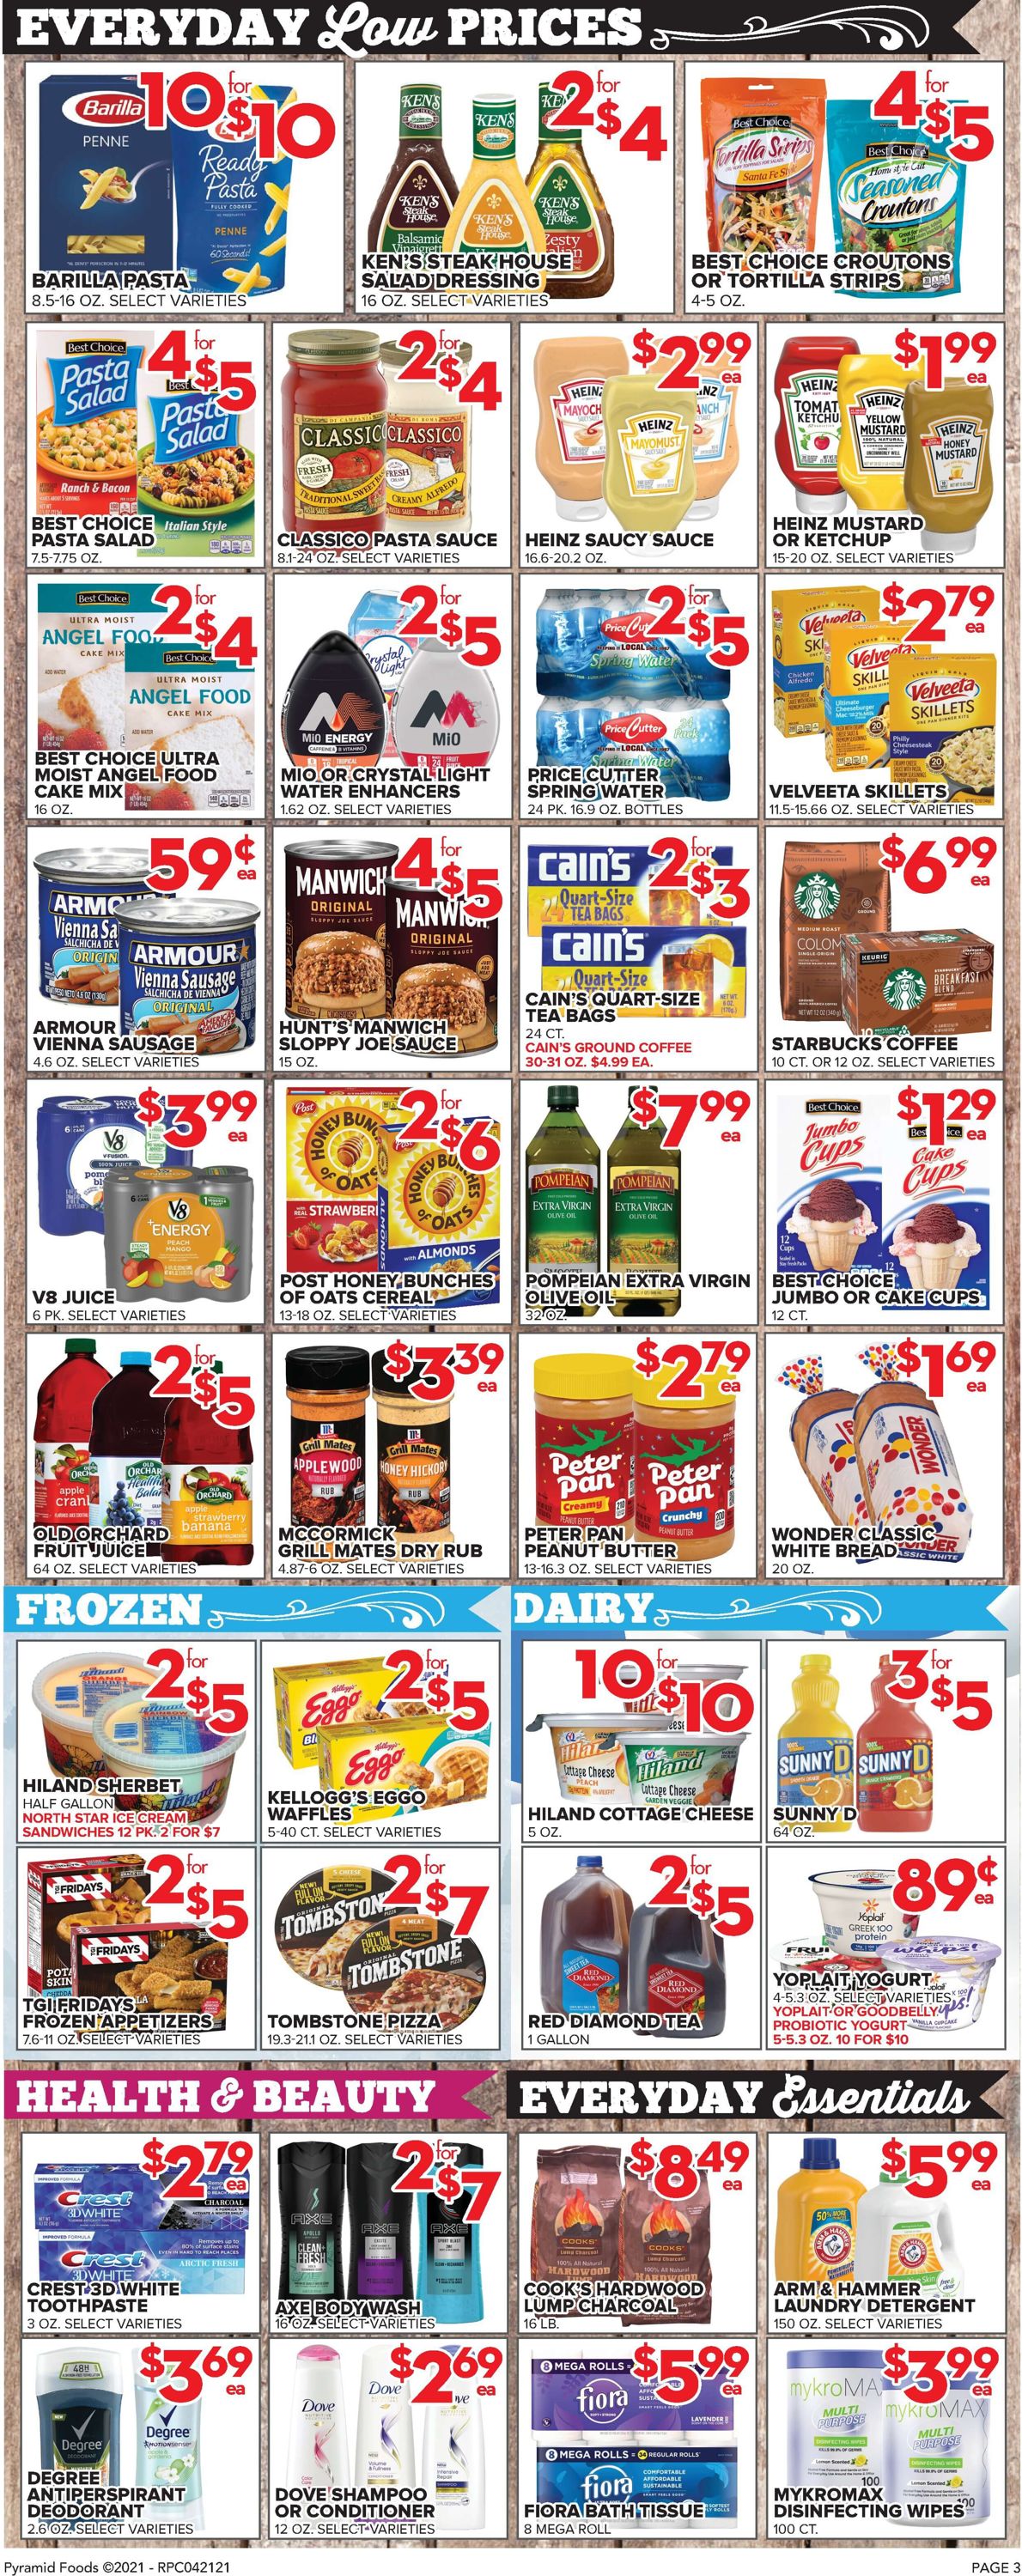 Price Cutter Weekly Ad Circular - valid 04/21-04/27/2021 (Page 3)